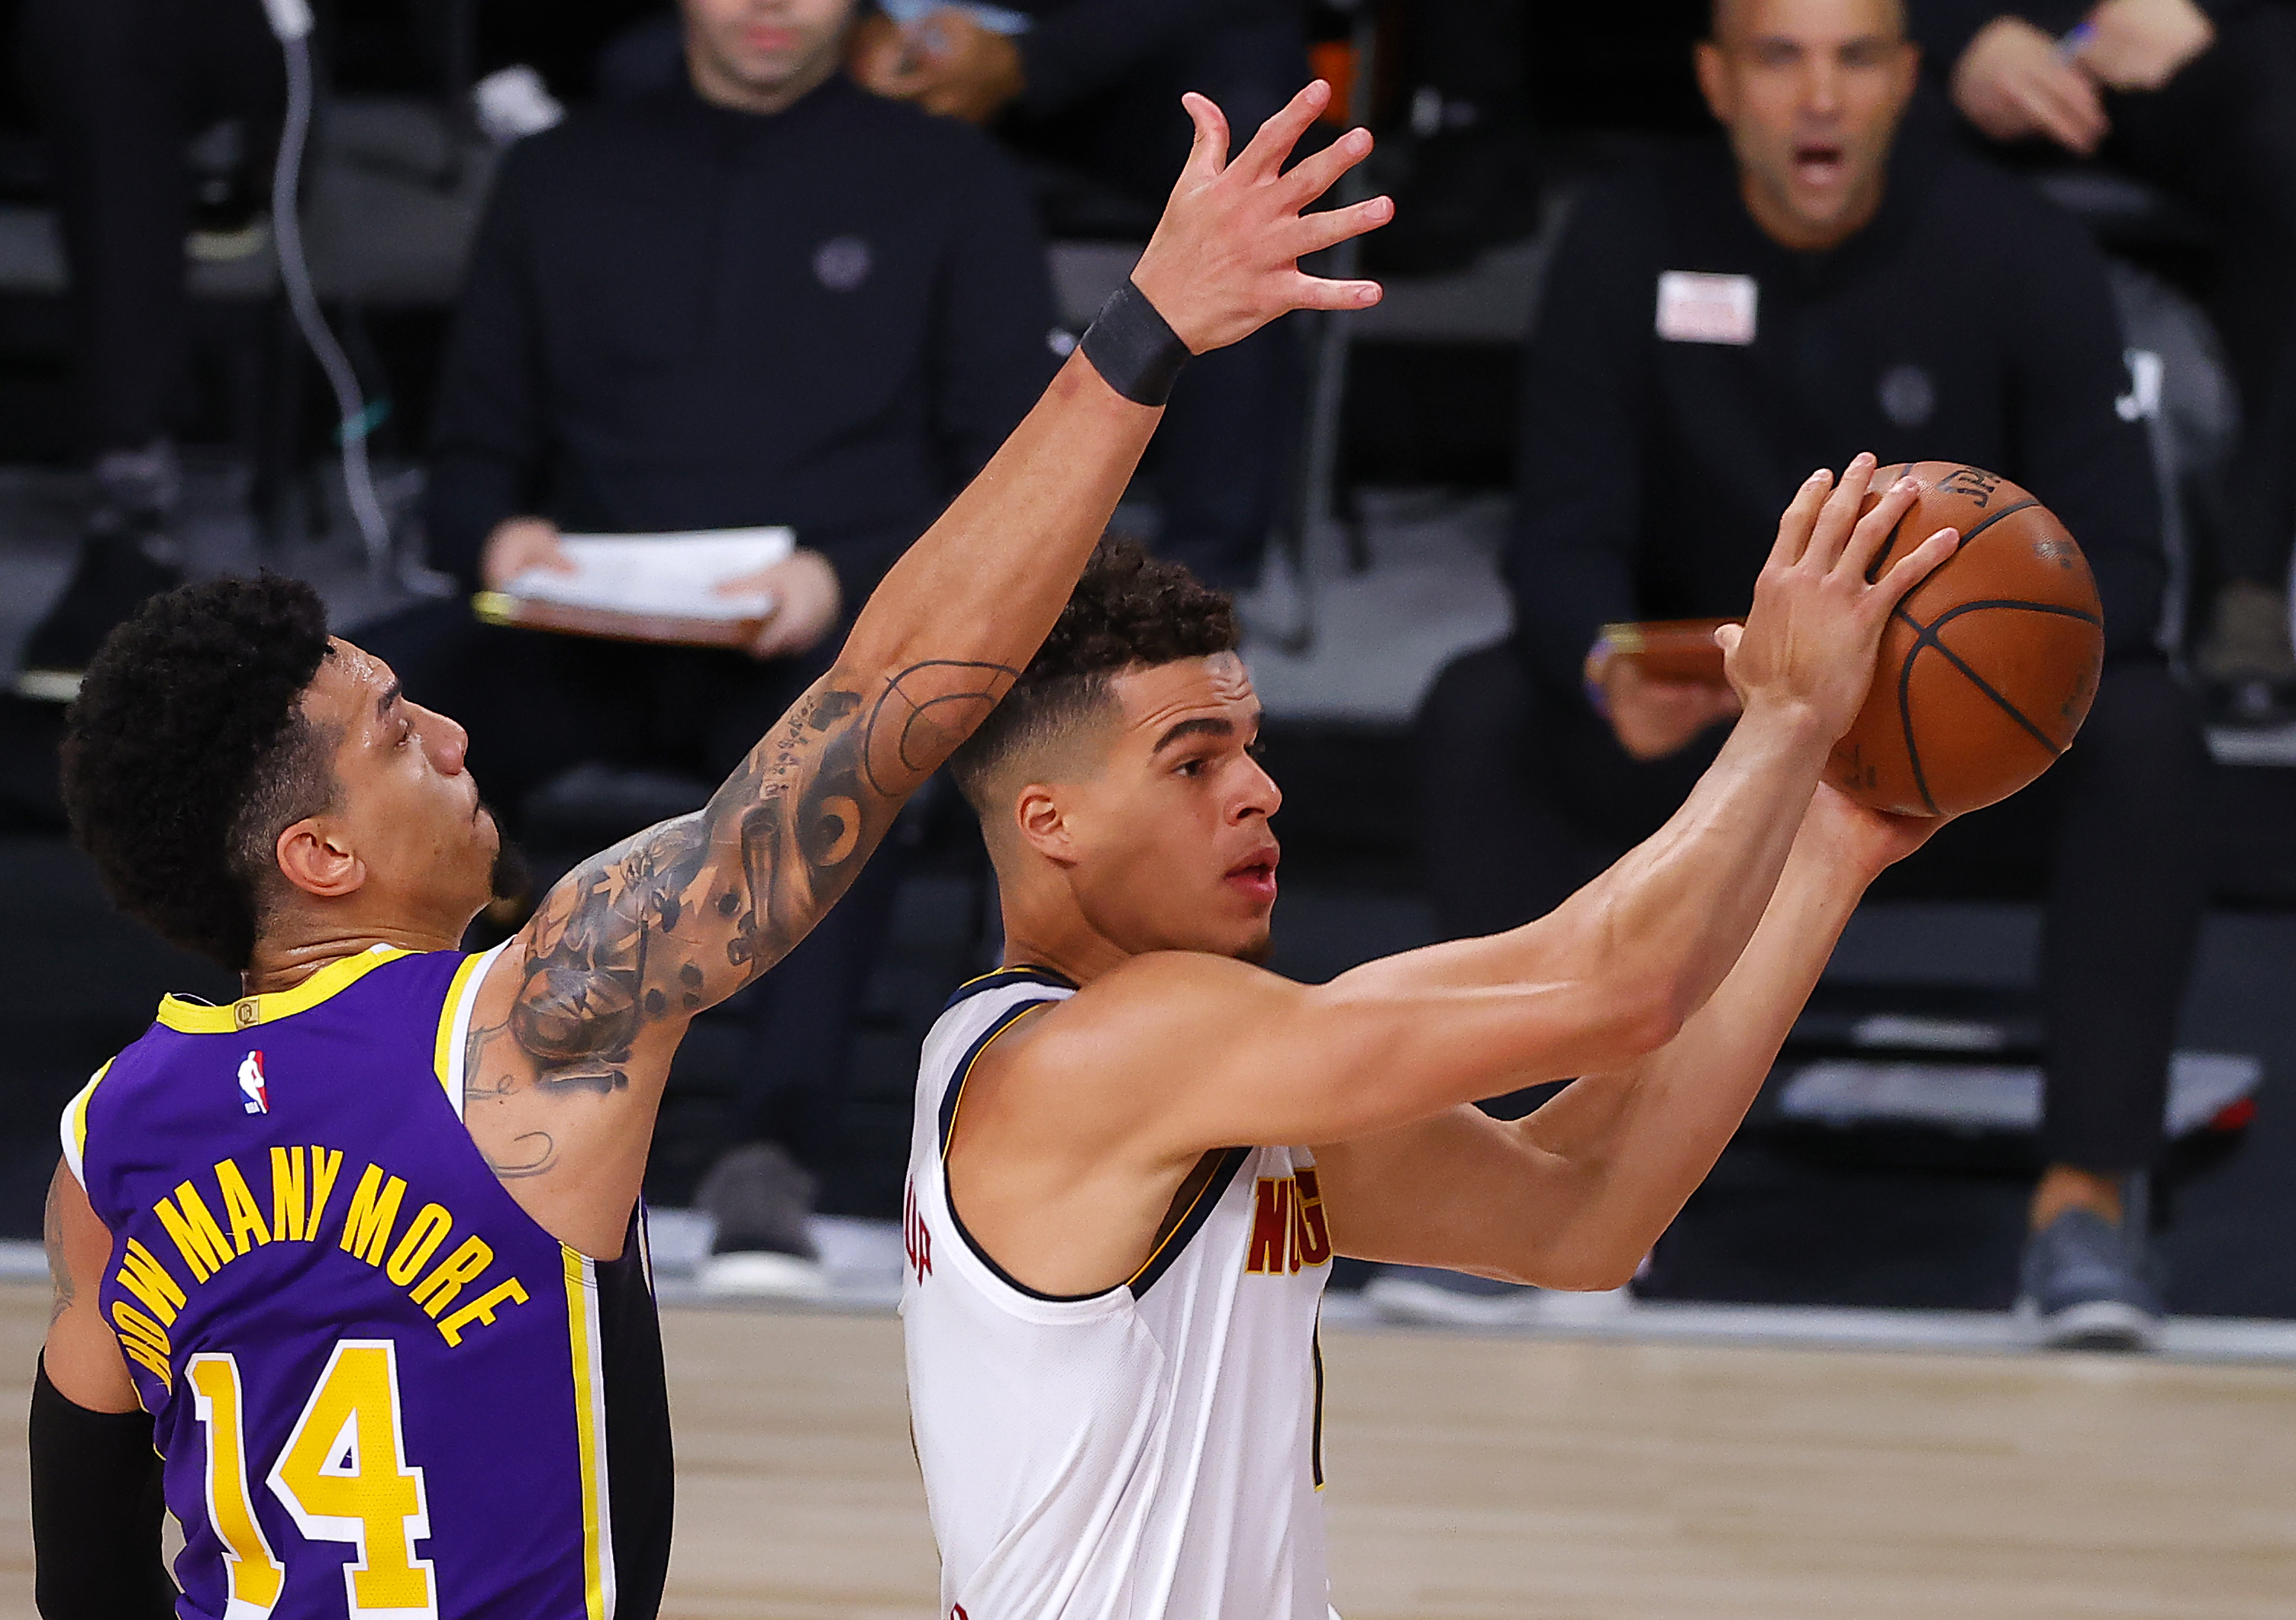 Michael Porter Jr. of the Denver Nuggets drives the ball against Danny Green of the Los Angeles Lakers during the 2020 NBA Playoffs at AdventHealth Arena at the ESPN Wide World Of Sports Complex on September 26, 2020.